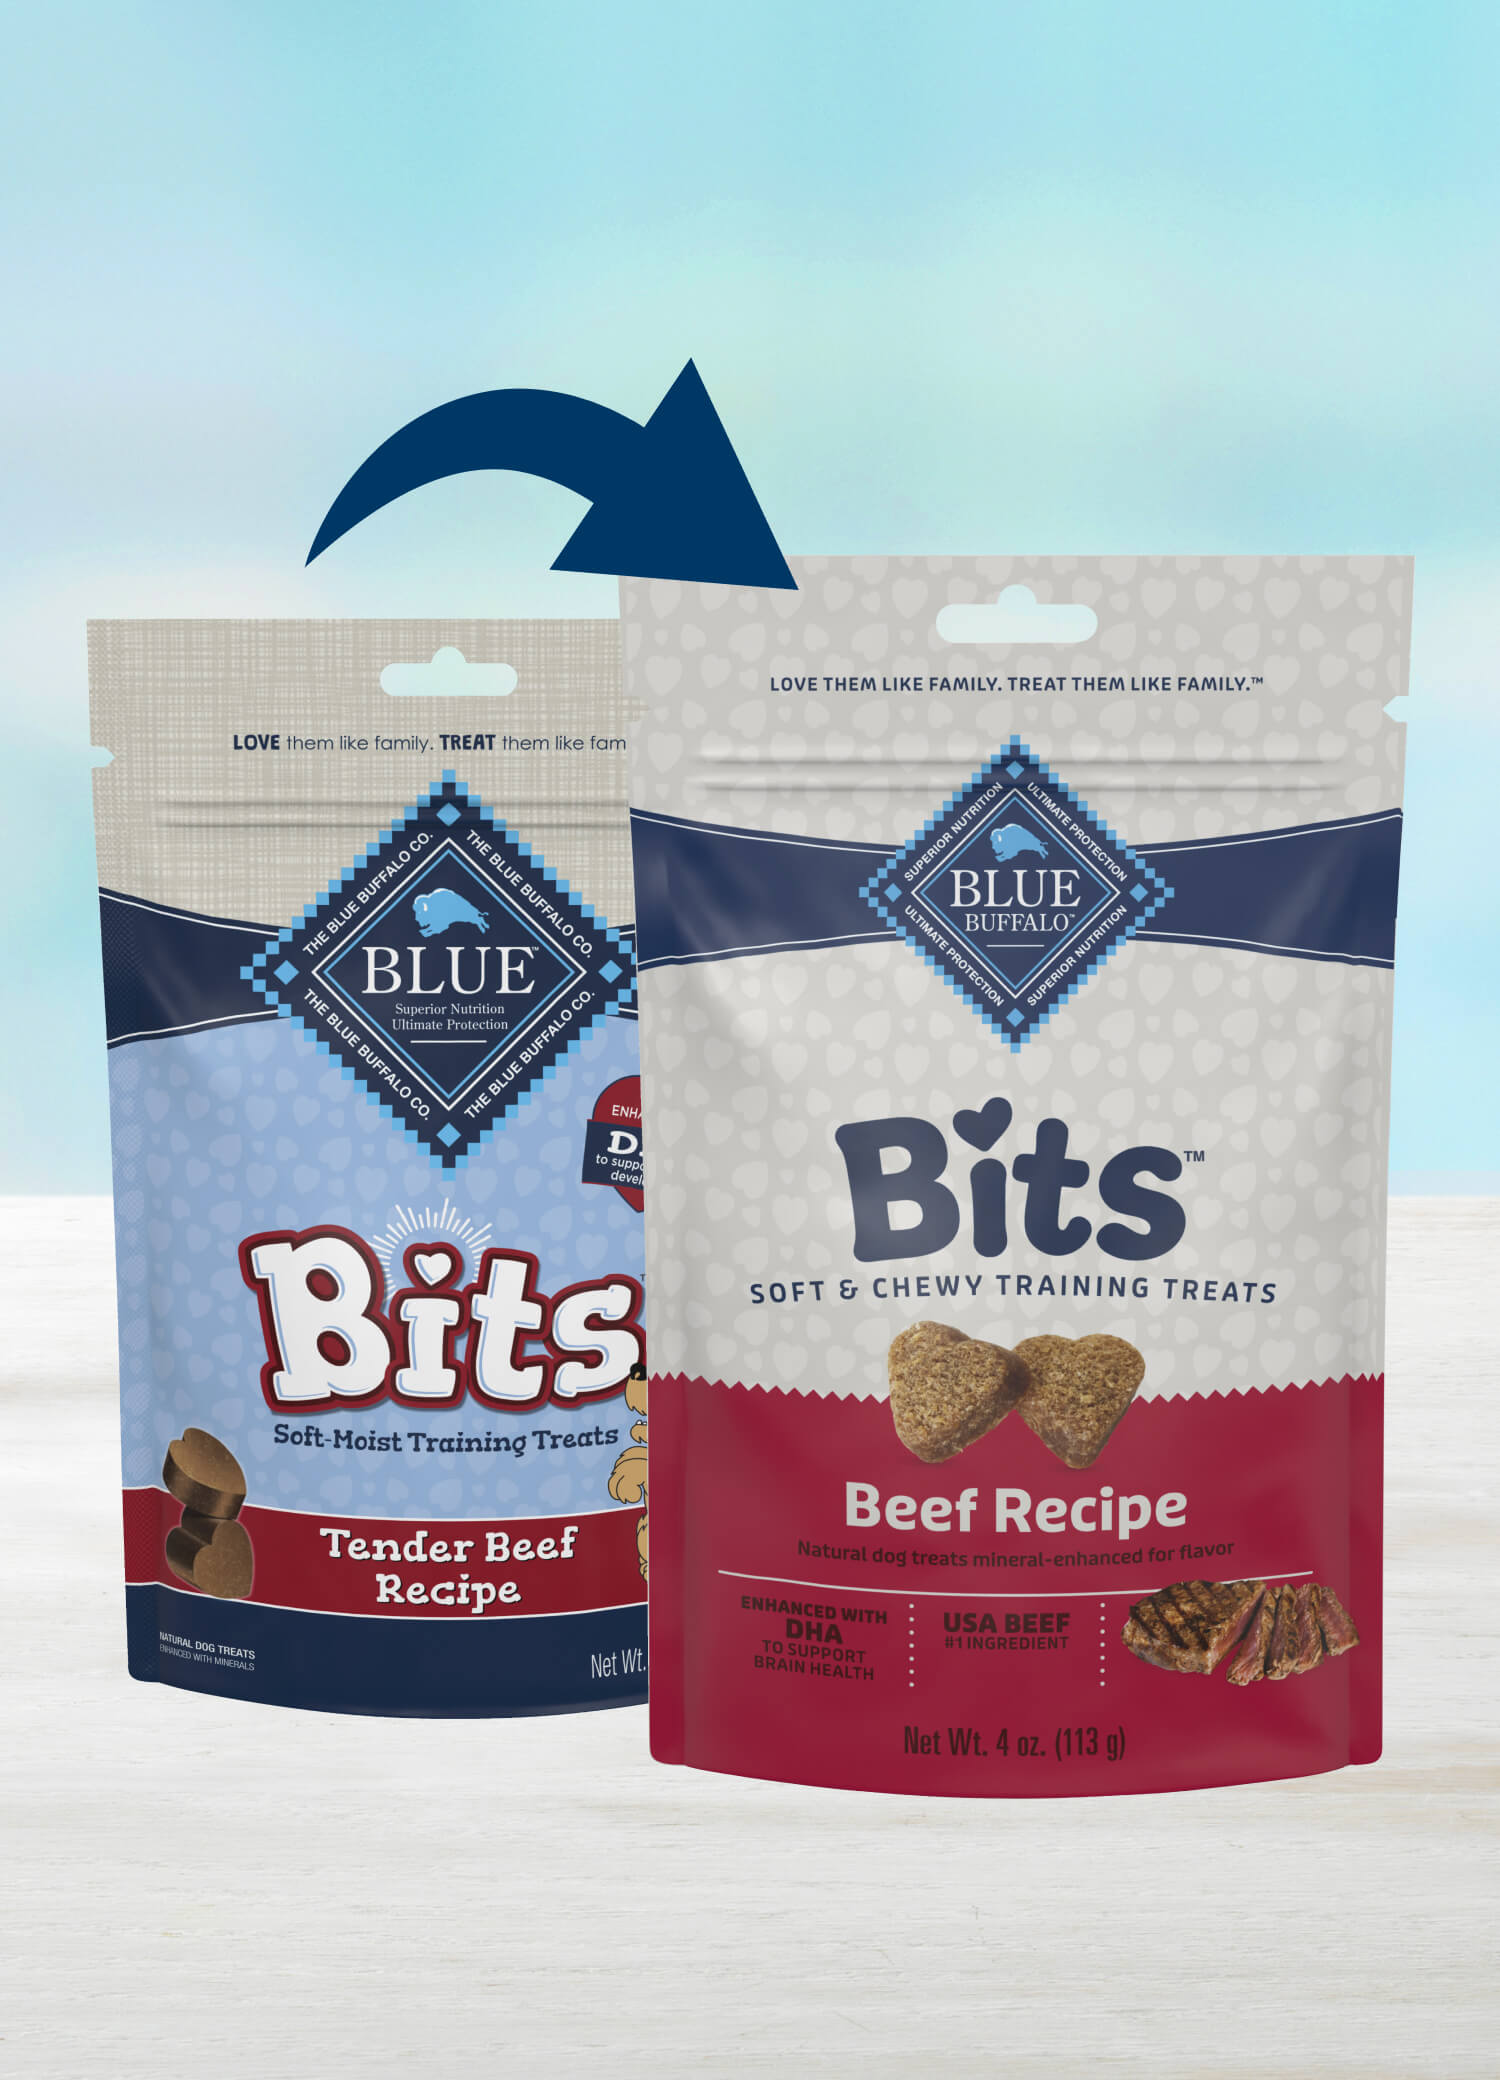 Blue Buffalo Bits Tender Beef Soft and Chewy Training Treats dog treats soft in new packshot bags, highlighting the packaging transition.